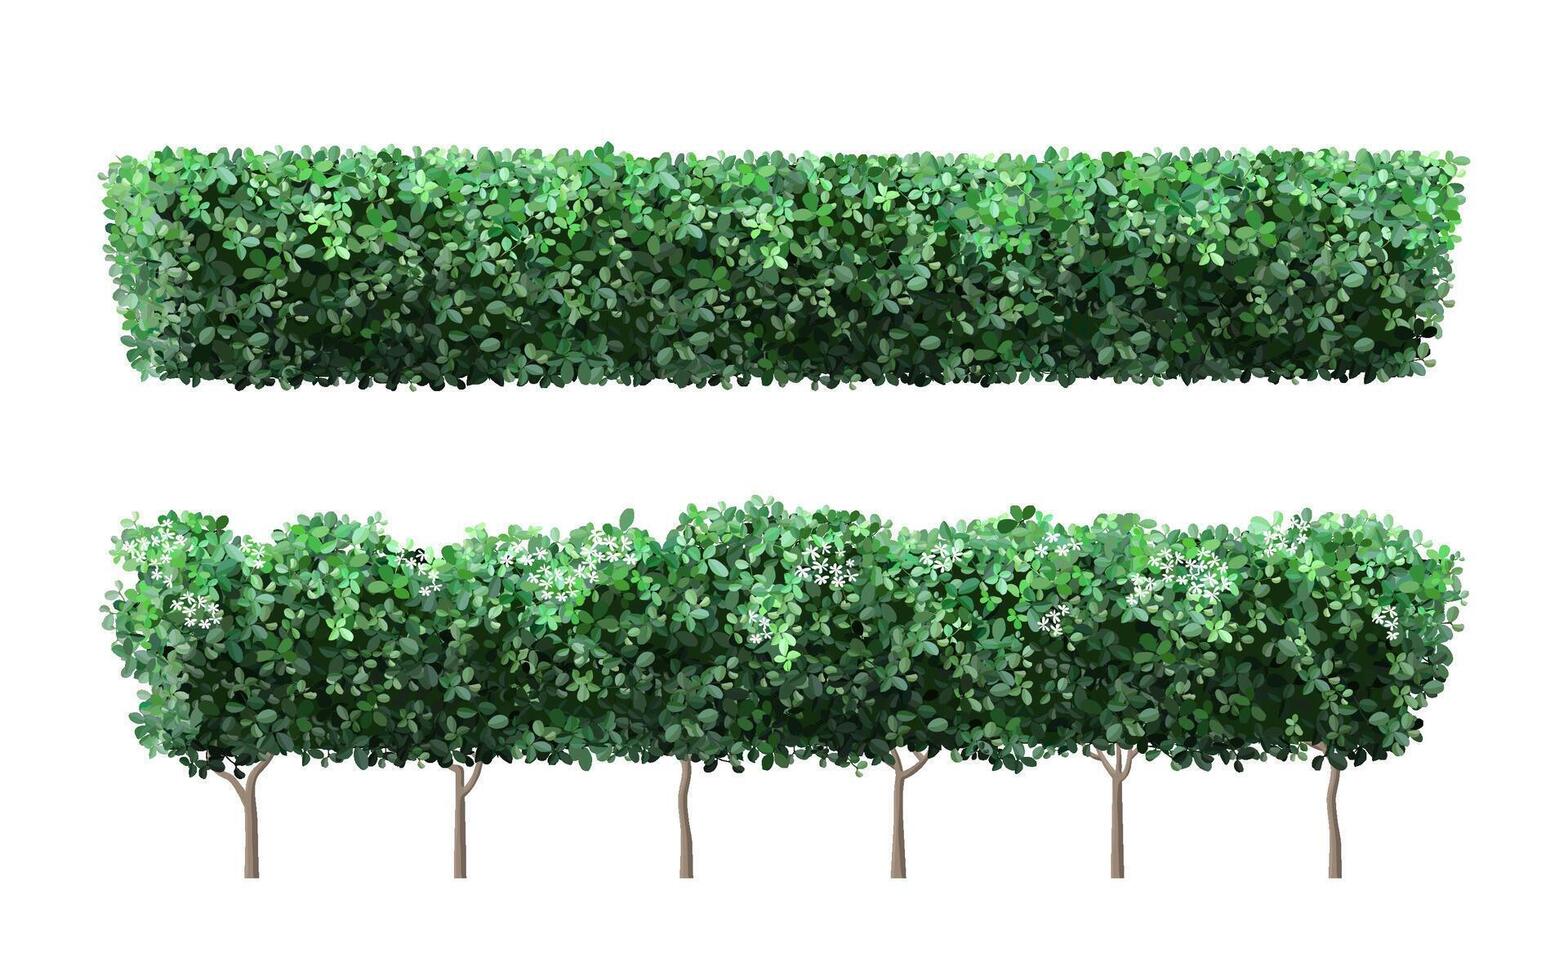 Realistic garden plant fence. Nature green seasonal bushes, tree crown bush foliage and green fence with cute flowers. Garden shrub vector illustration set